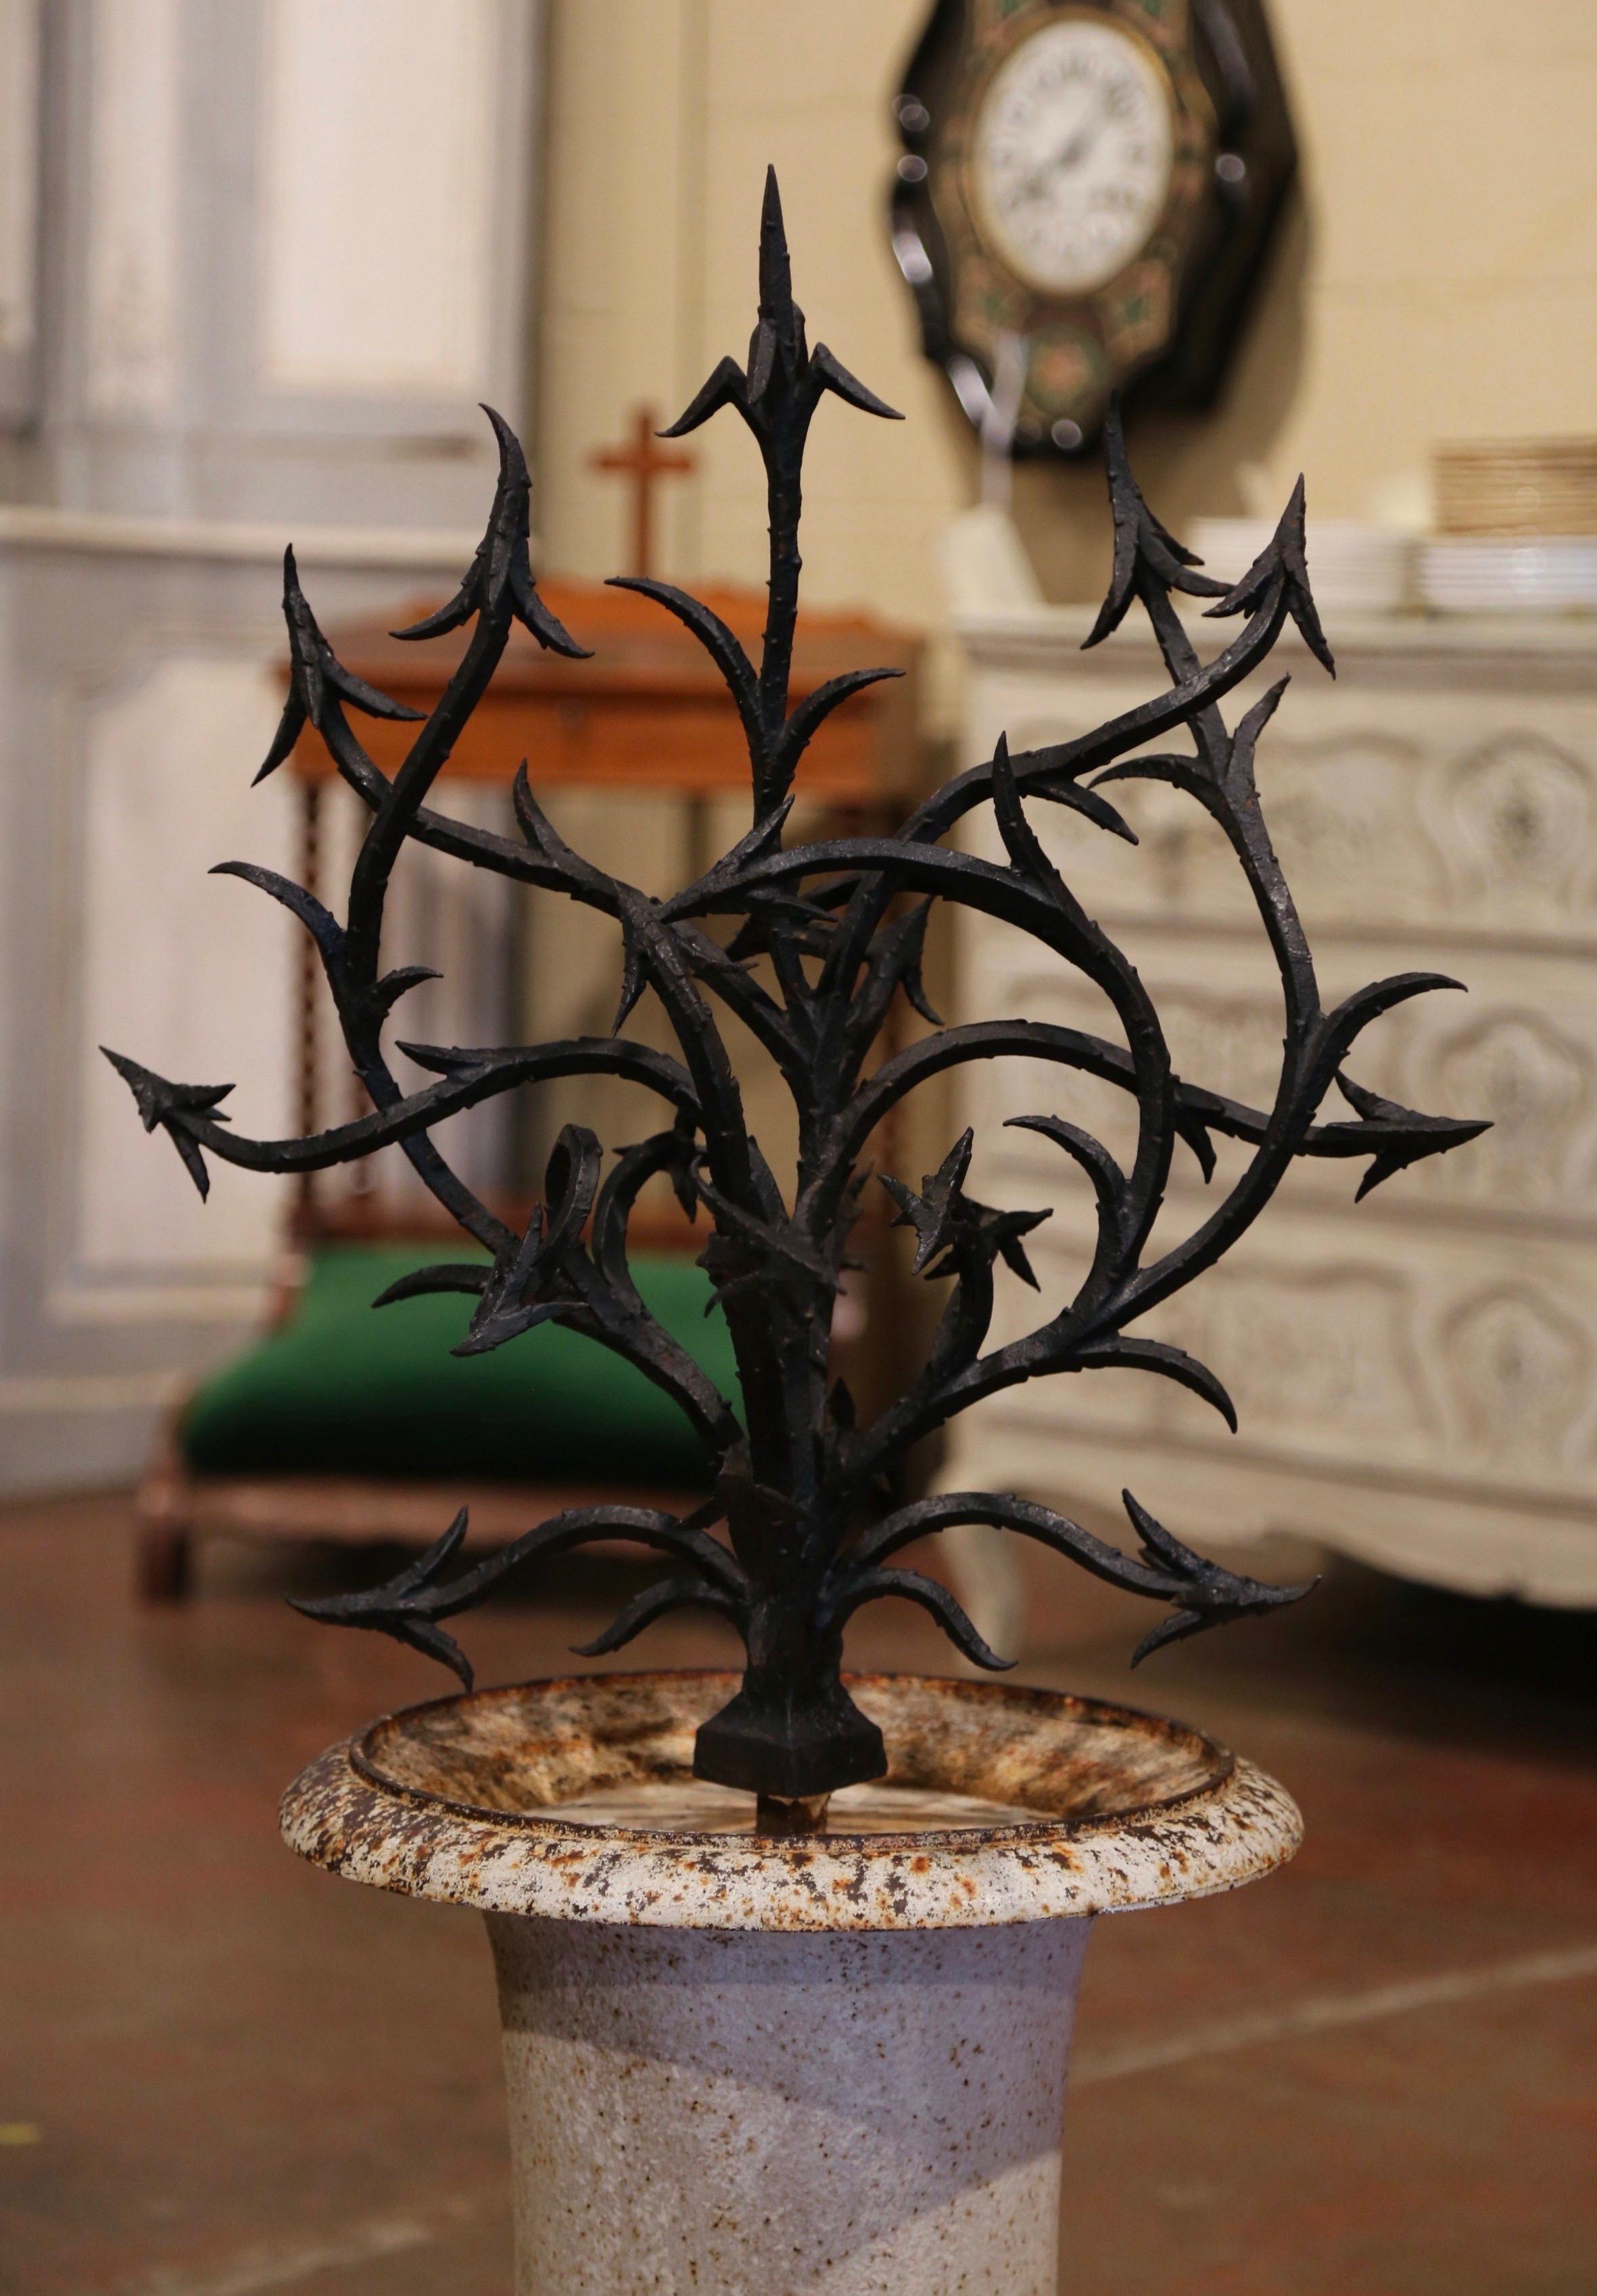 This antique urn composition was created in France circa 1880; made of iron, the medicis vase is filled with a tree like forged iron bush. The tall planter is in excellent condition with the original patinated painted finish, and could be used